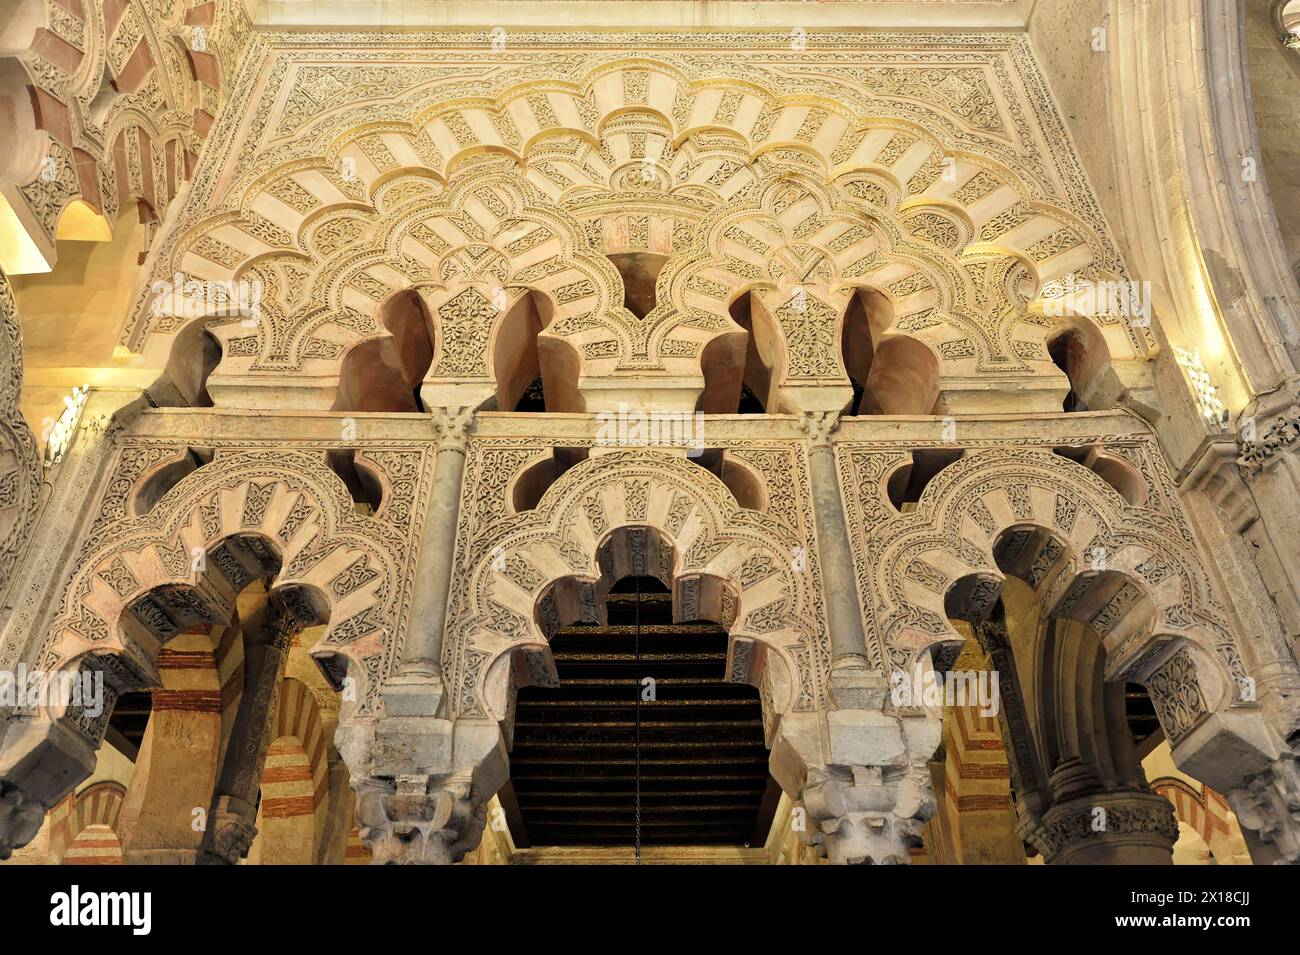 Mezquita, former mosque, now cathedral, Cordoba, An impressive vaulted ceiling combines Islamic and Gothic style elements with ornamental details Stock Photo